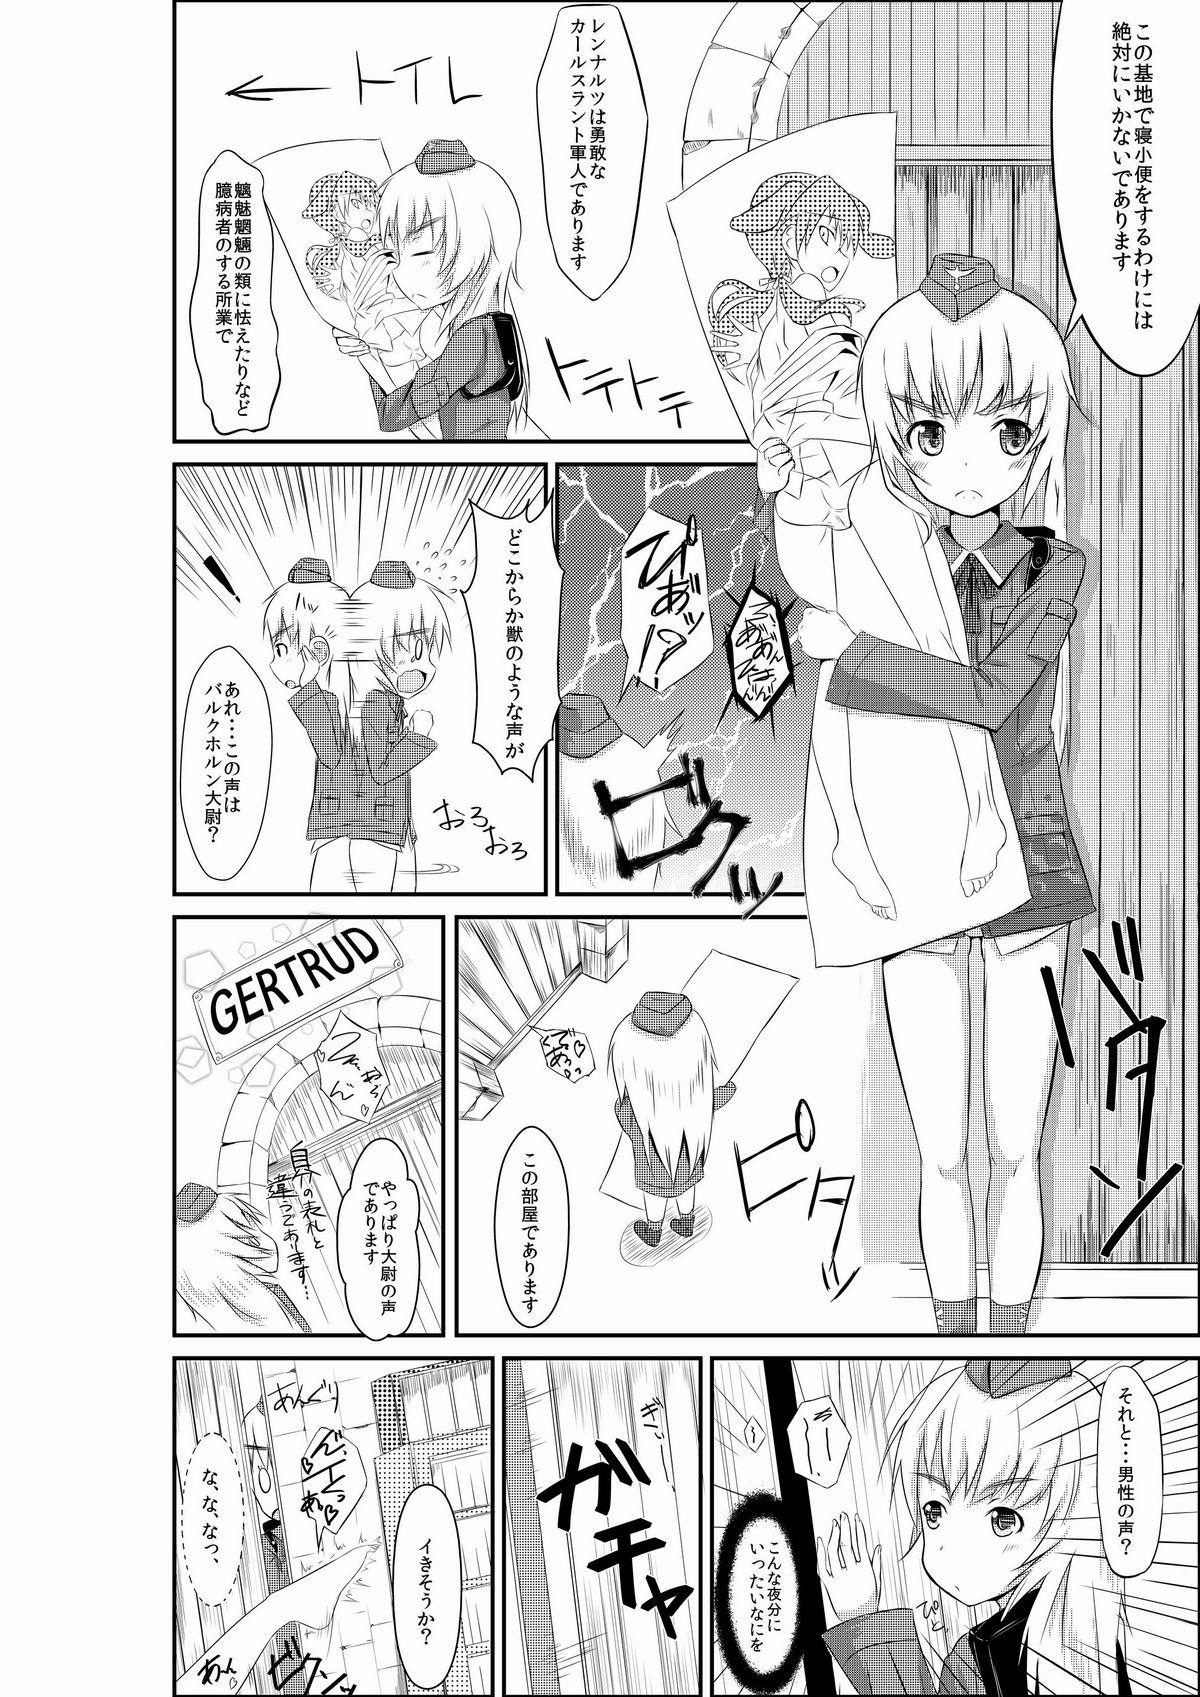 Blow Job 練習 お姉ちゃんとヘルマちゃん - Strike witches Culote - Page 2